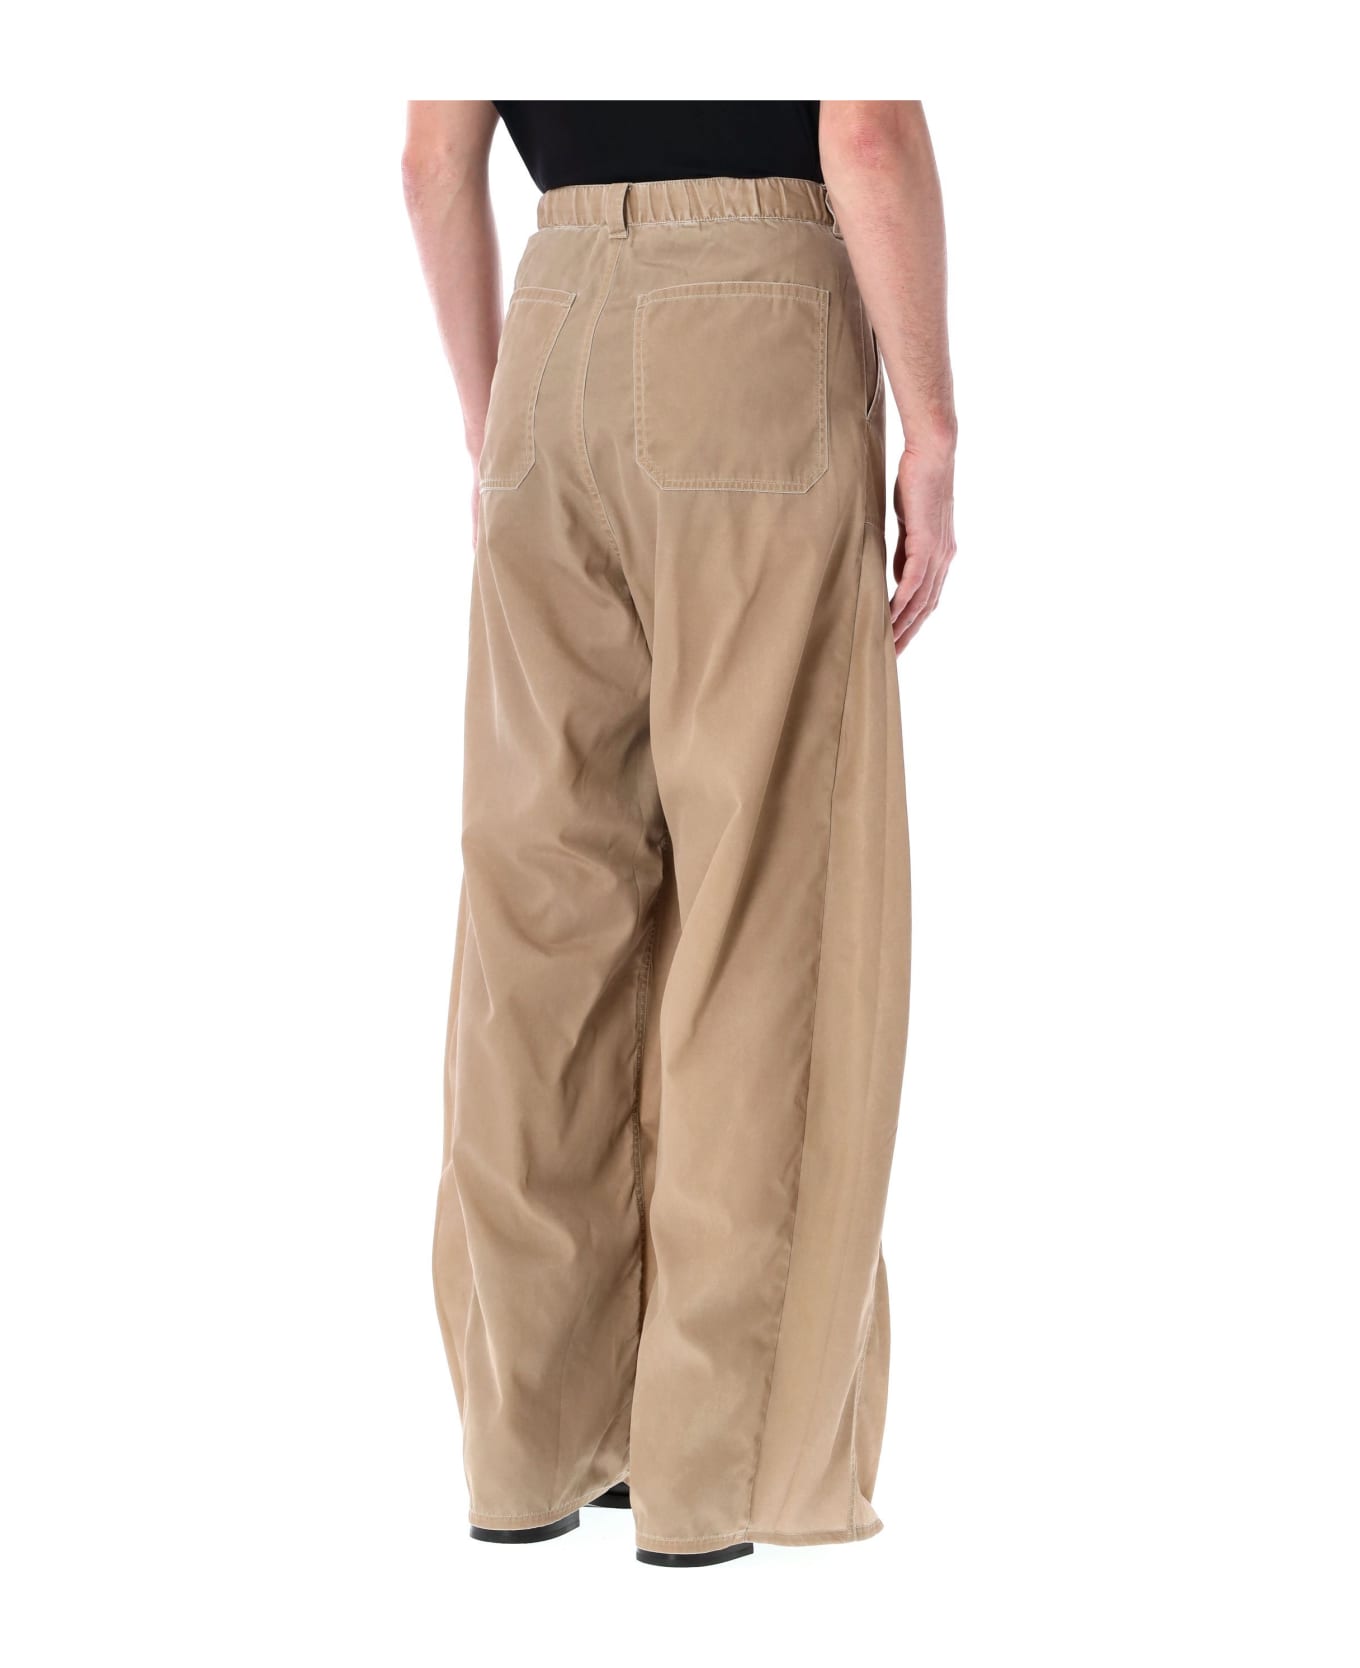 Y/Project Washed Pop-up Pant - WASHED BEIGE